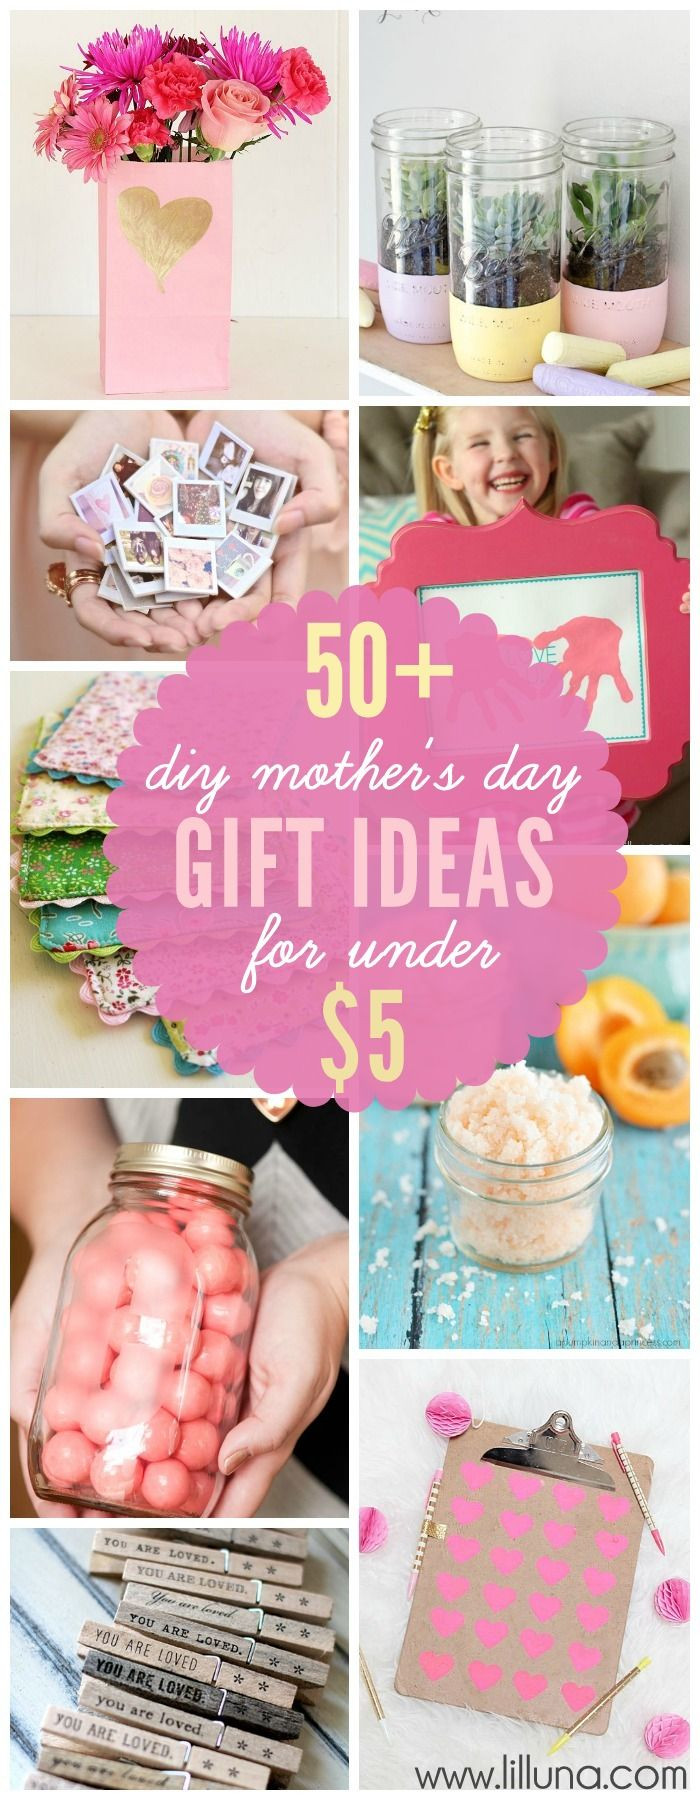 Mother'S Day Gift Ideas Homemade Crafts
 BEST Homemade Mothers Day Gifts so many great ideas